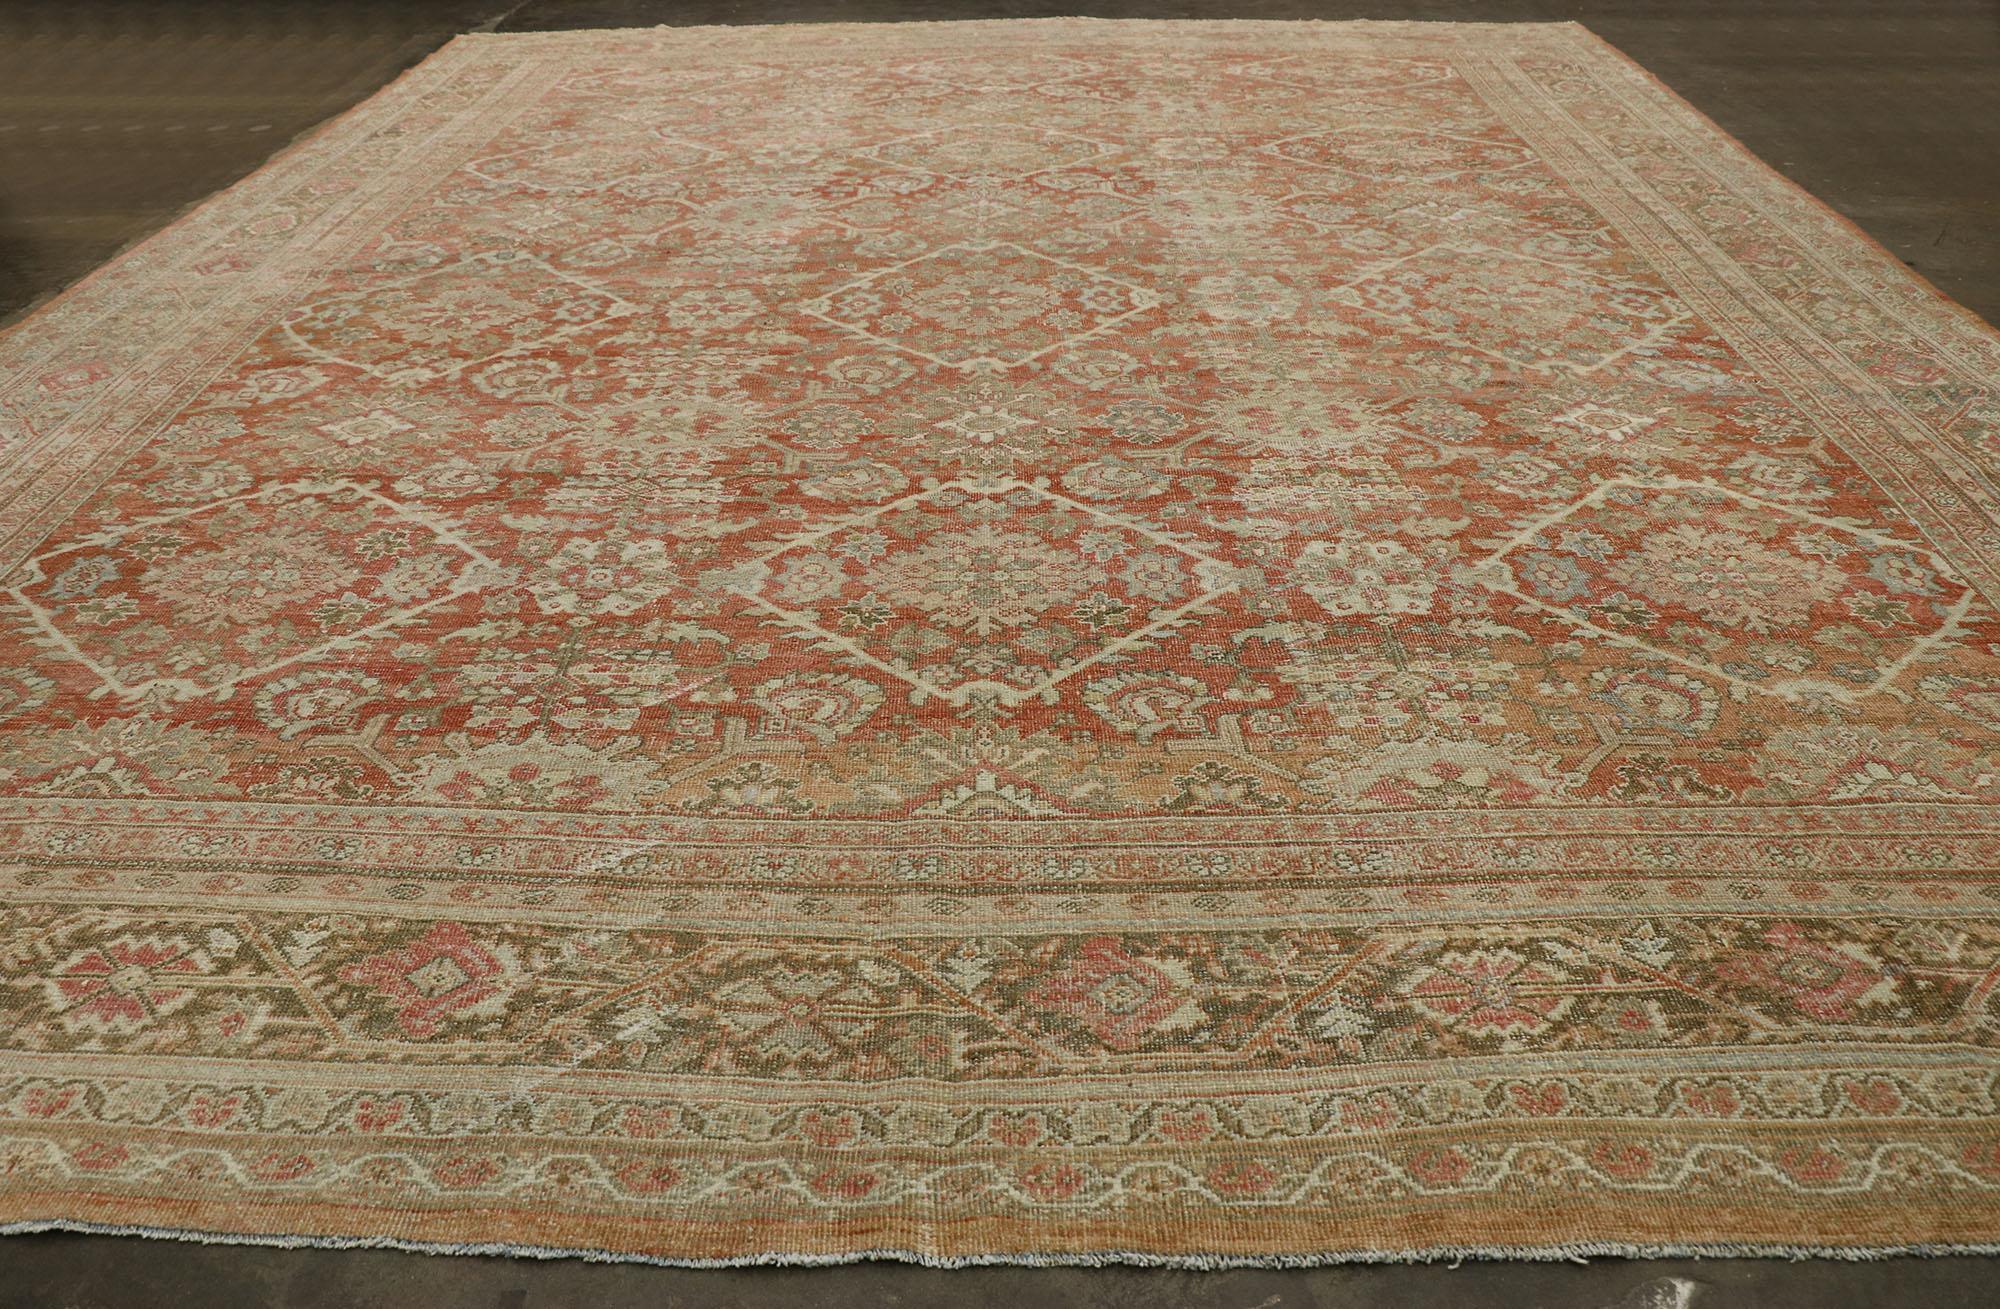 Distressed Antique Persian Mahal Rug with Rustic Spanish Mission Style 2